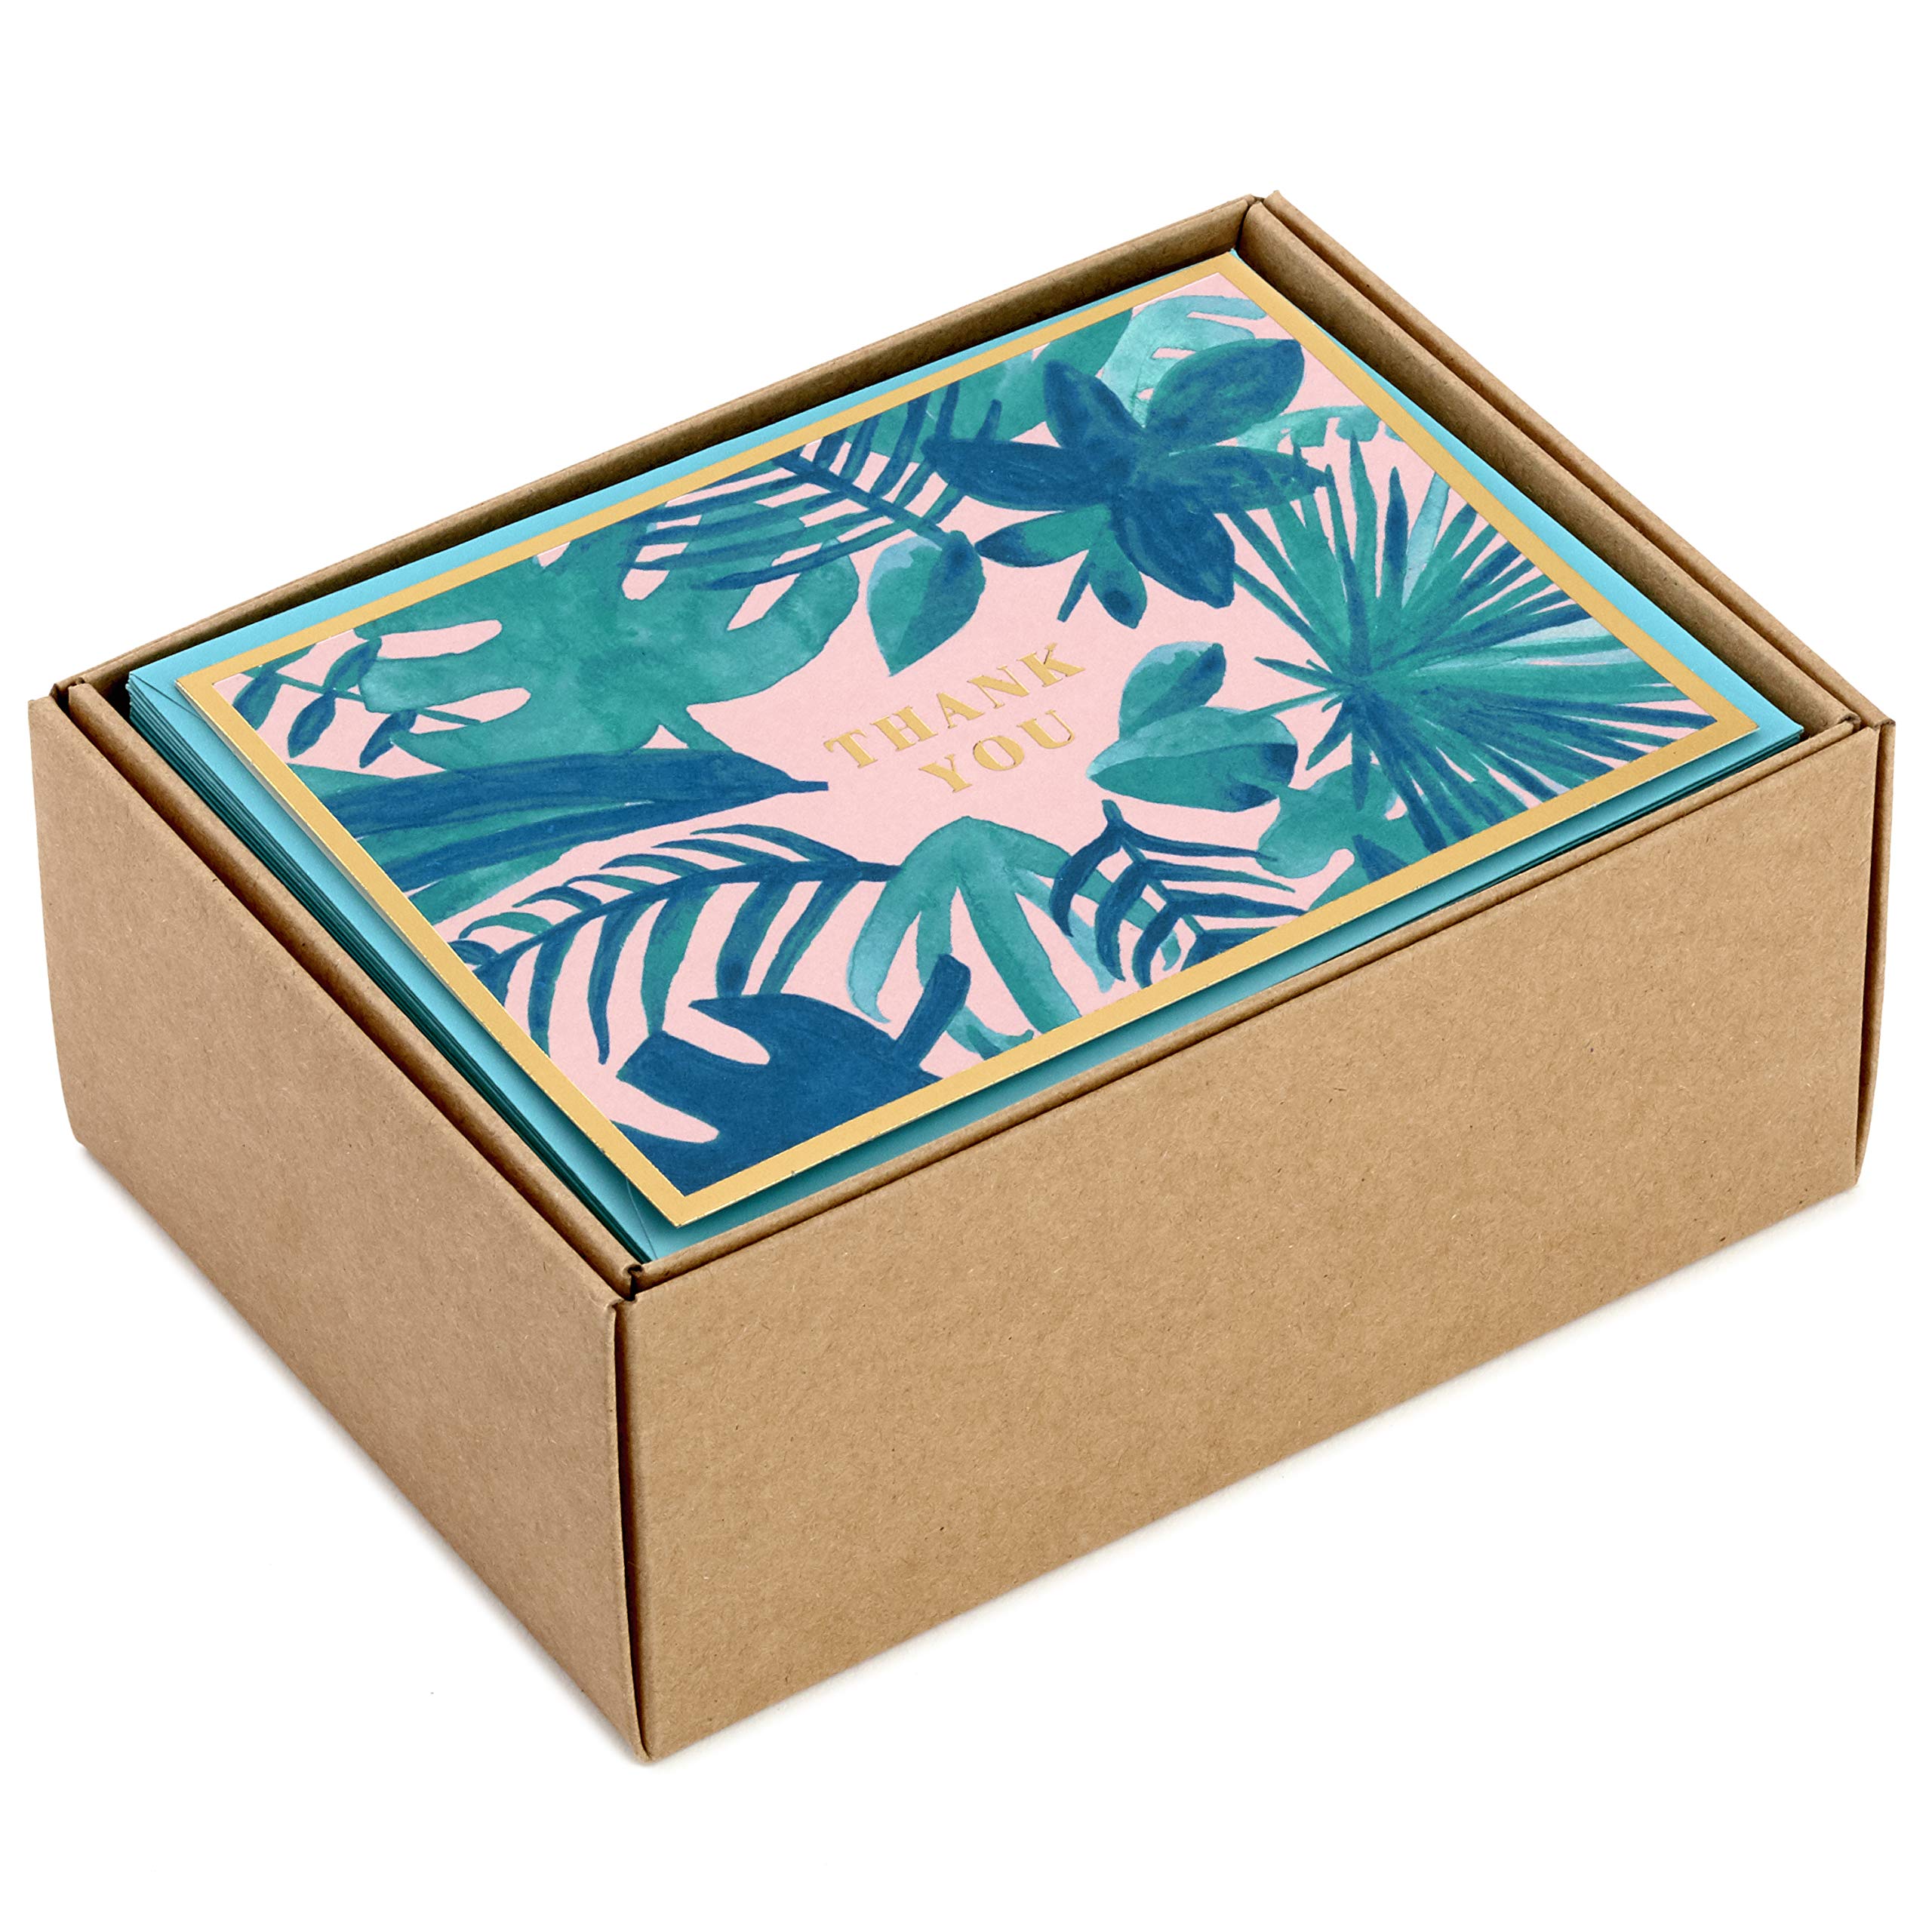 Hallmark Boxed Thank You and Blank Cards Assortment (Four Assorted Tropical Designs, 40 Note Cards and Envelopes)